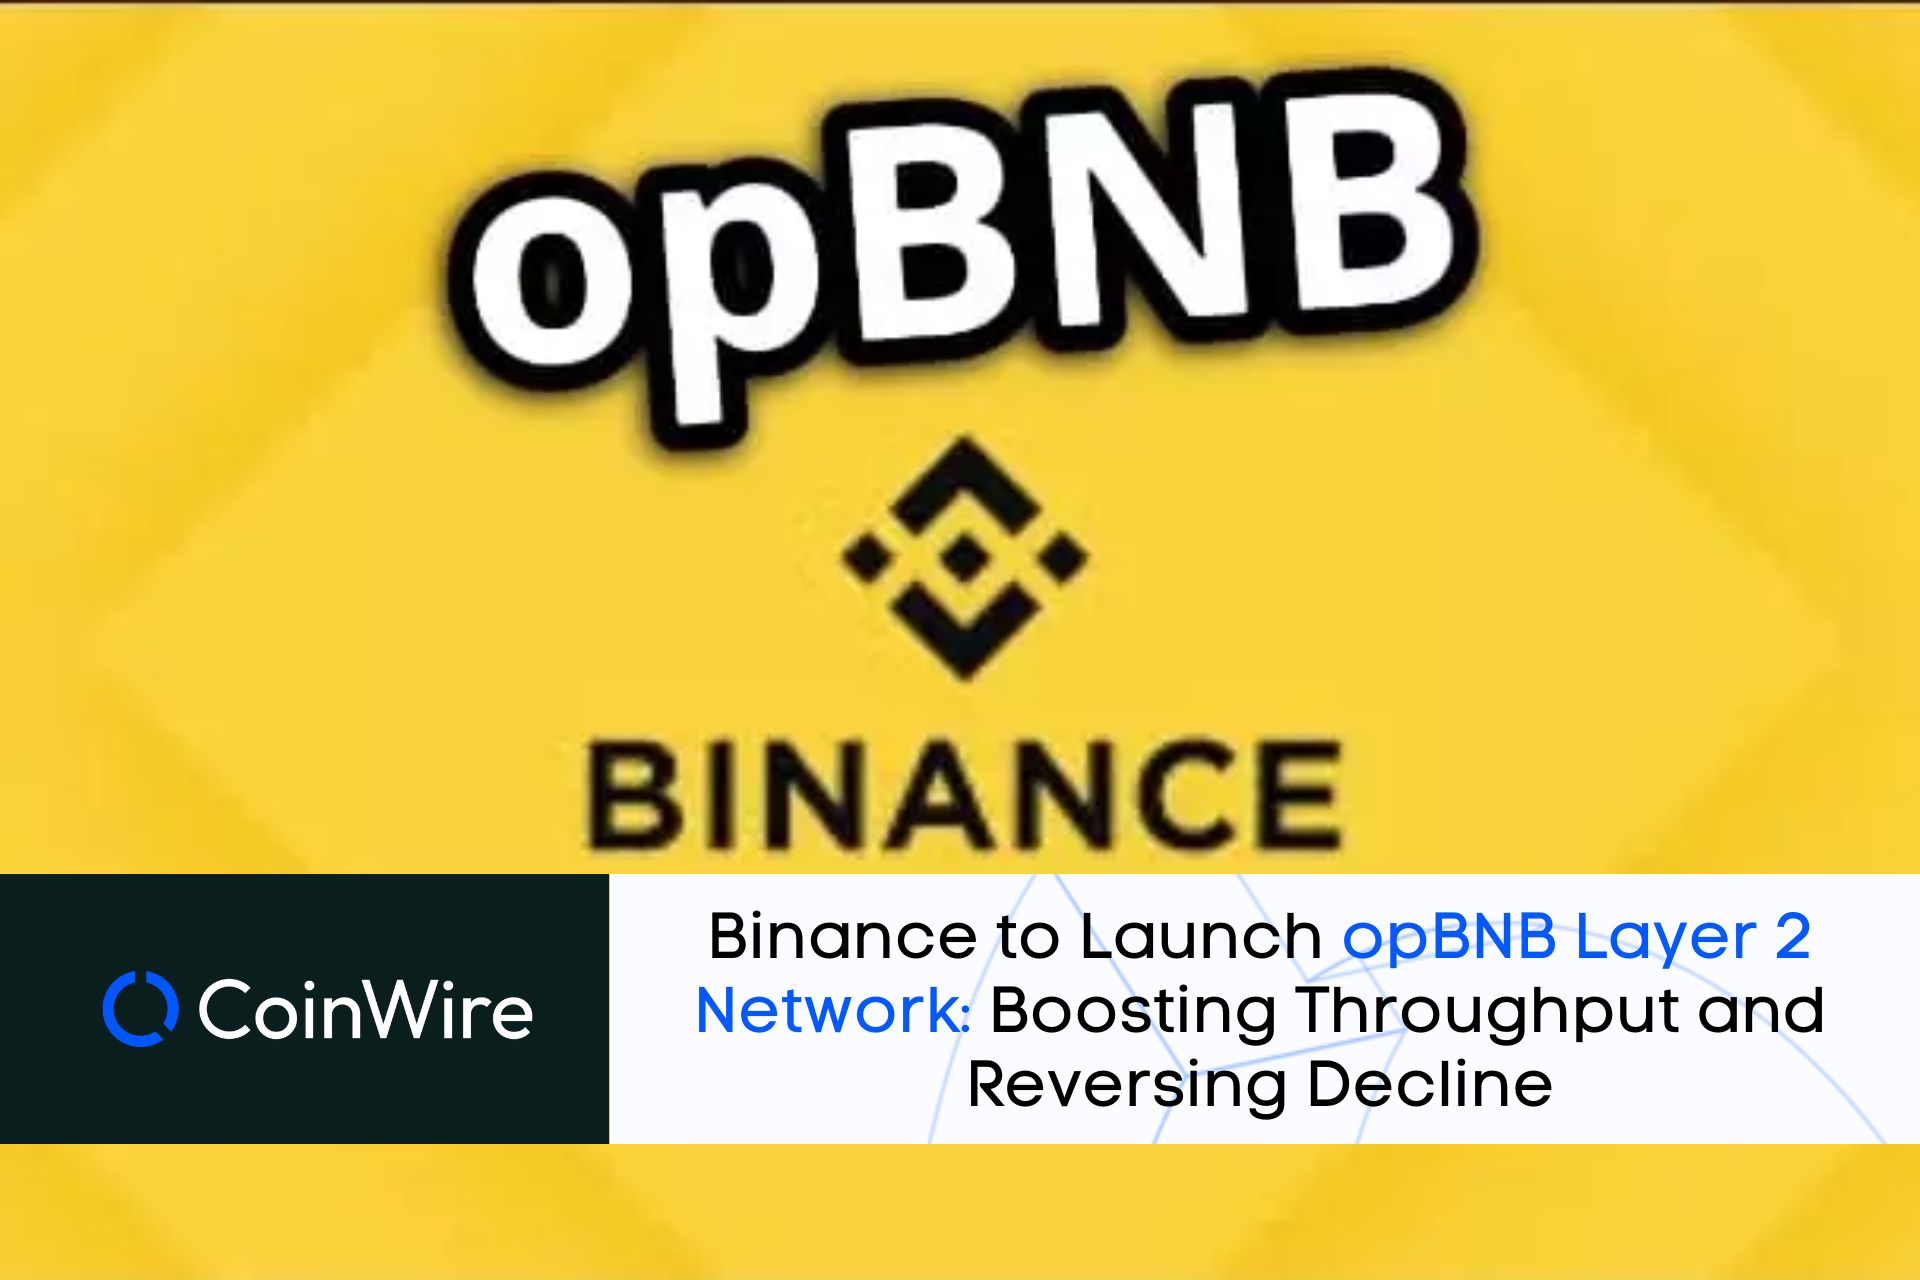 Binance To Launch Opbnb Layer 2 Network: Boosting Throughput And Reversing Decline